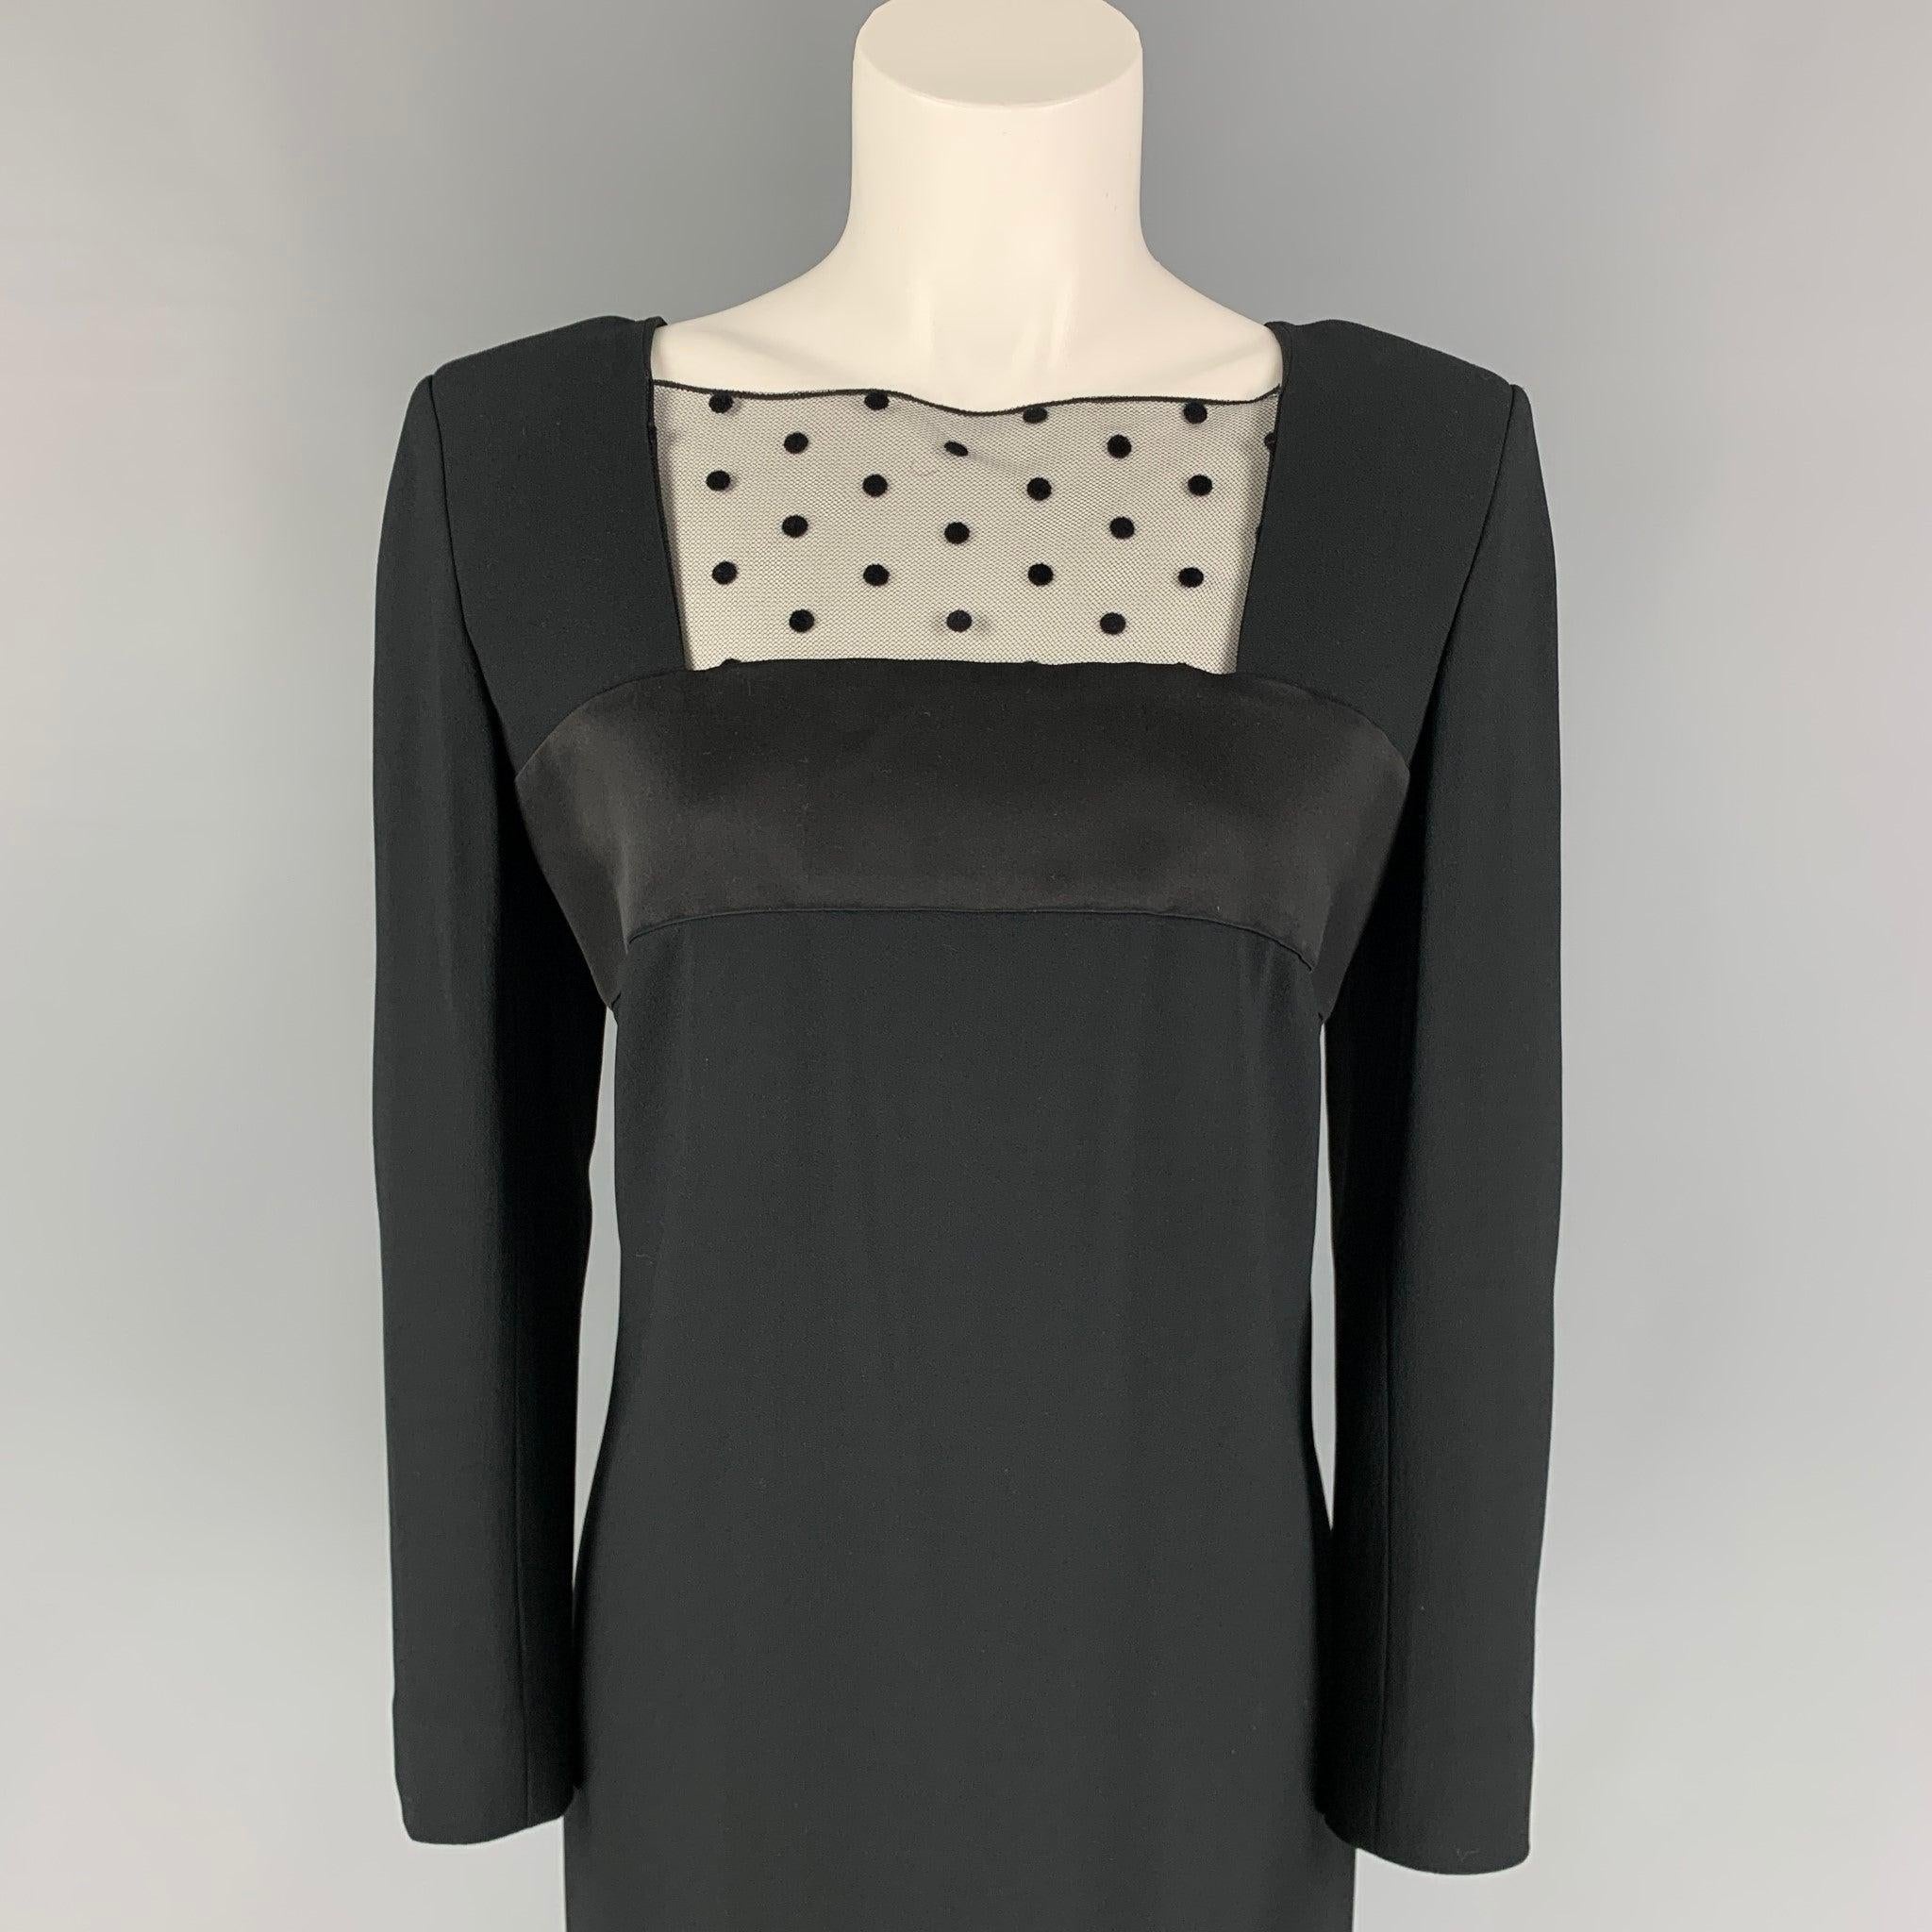 SAINT LAURENT dress comes in a black acetate blend featuring a satin trim, lace panel, buttoned sleeves, and a back zip up closure. Made in France.
Very Good
Pre-Owned Condition. 

Marked:   F 40 

Measurements: 
 
Shoulder: 16.5 inches  Bust: 36